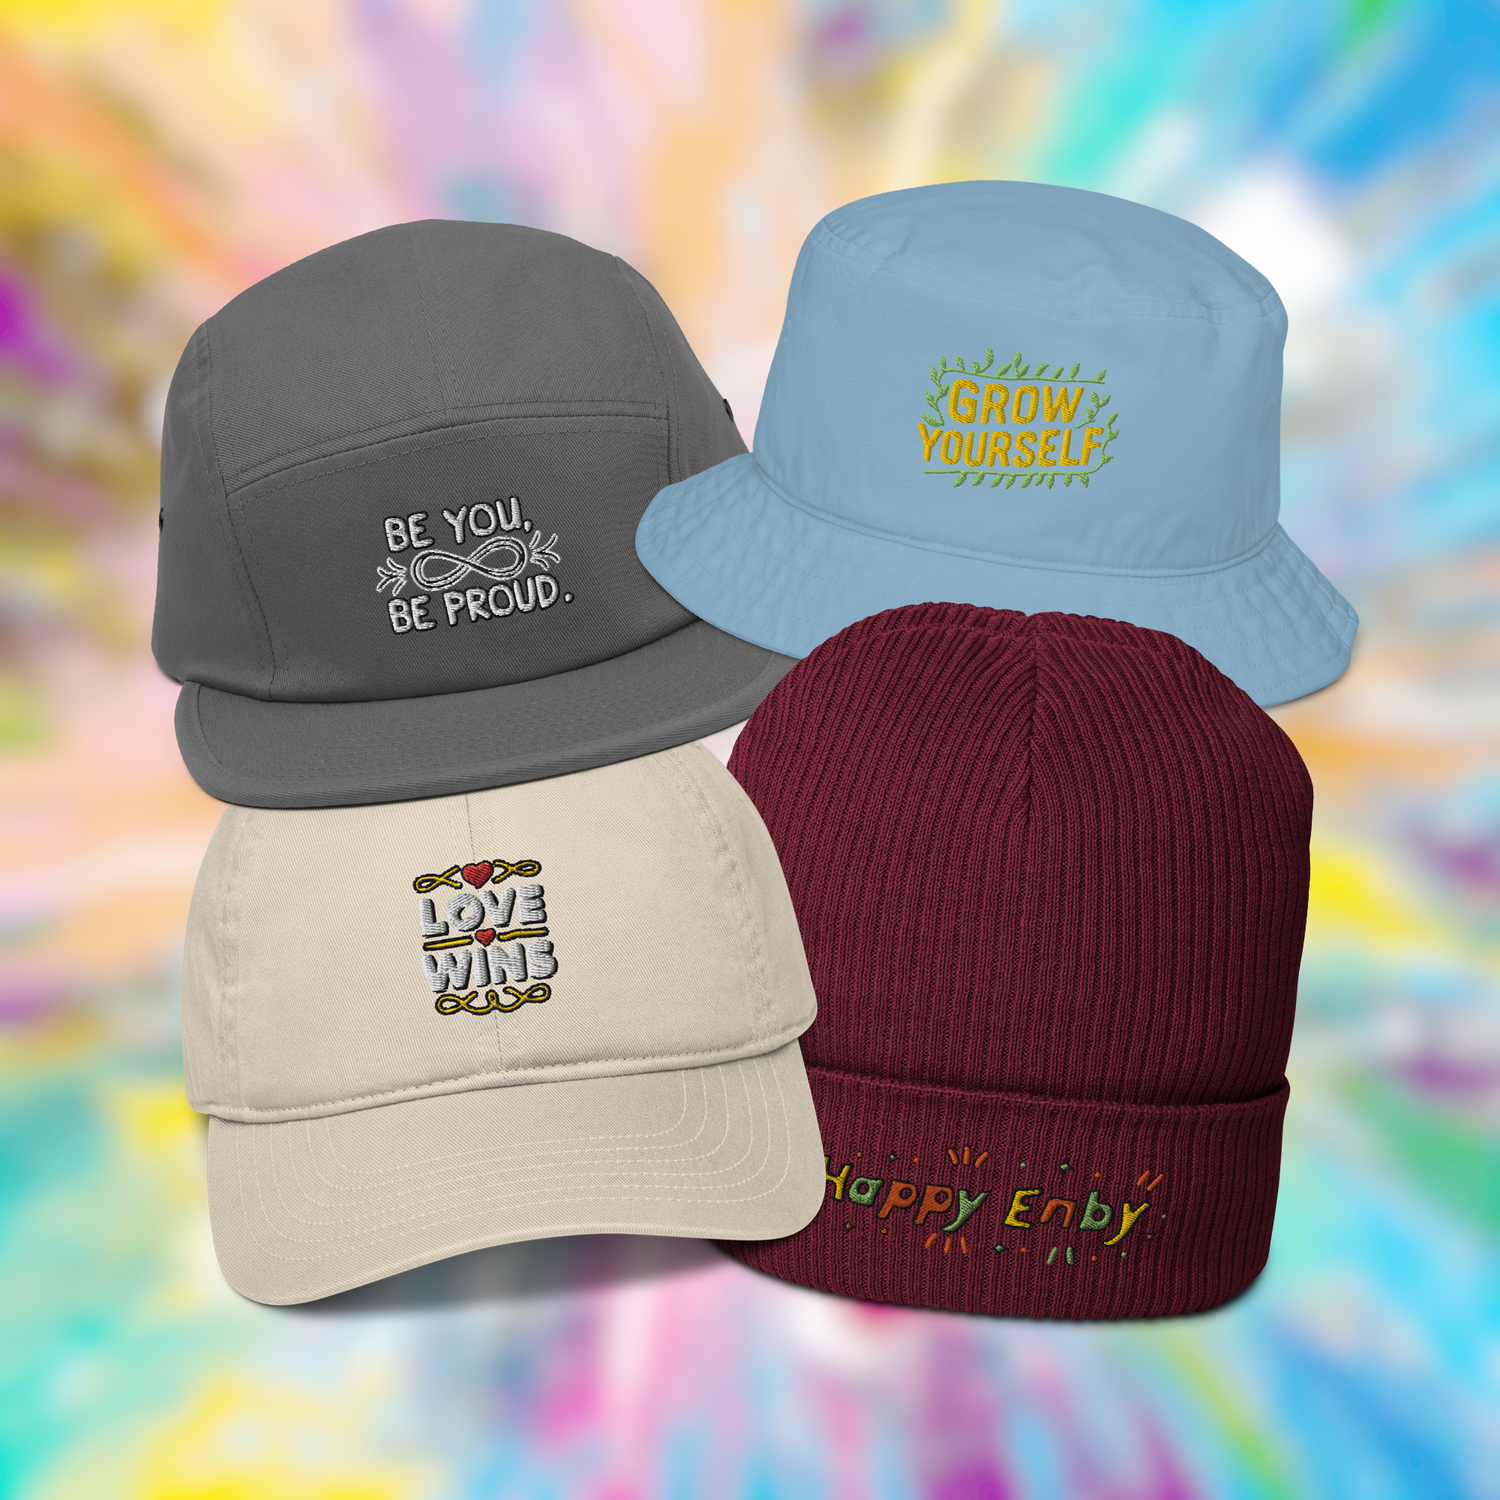 A beanie, a bucket hat, and two types of caps in green, blue, and red colors, made from organic cotton, displayed against an earthy background.